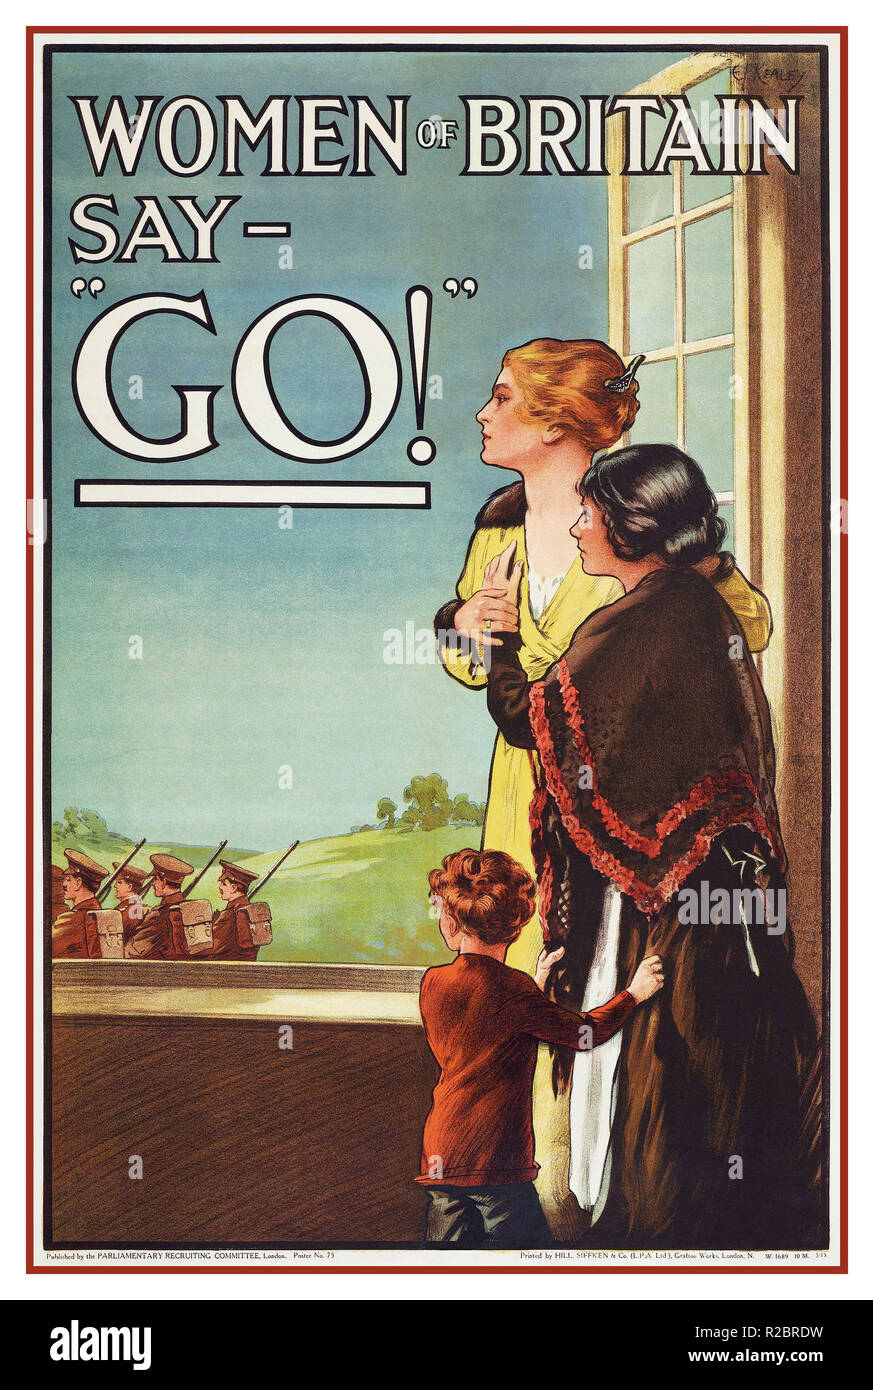 Vintage 1915 WW1 Propaganda Recruitment Recruiting Poster, ’Women of Britain say - 'Go!' ’, May 1915, United Kingdom, by Parliamentary Recruiting Committee, Hill, Siffken & Co., Department of Defence, World War One 1914-1918 UK Stock Photo